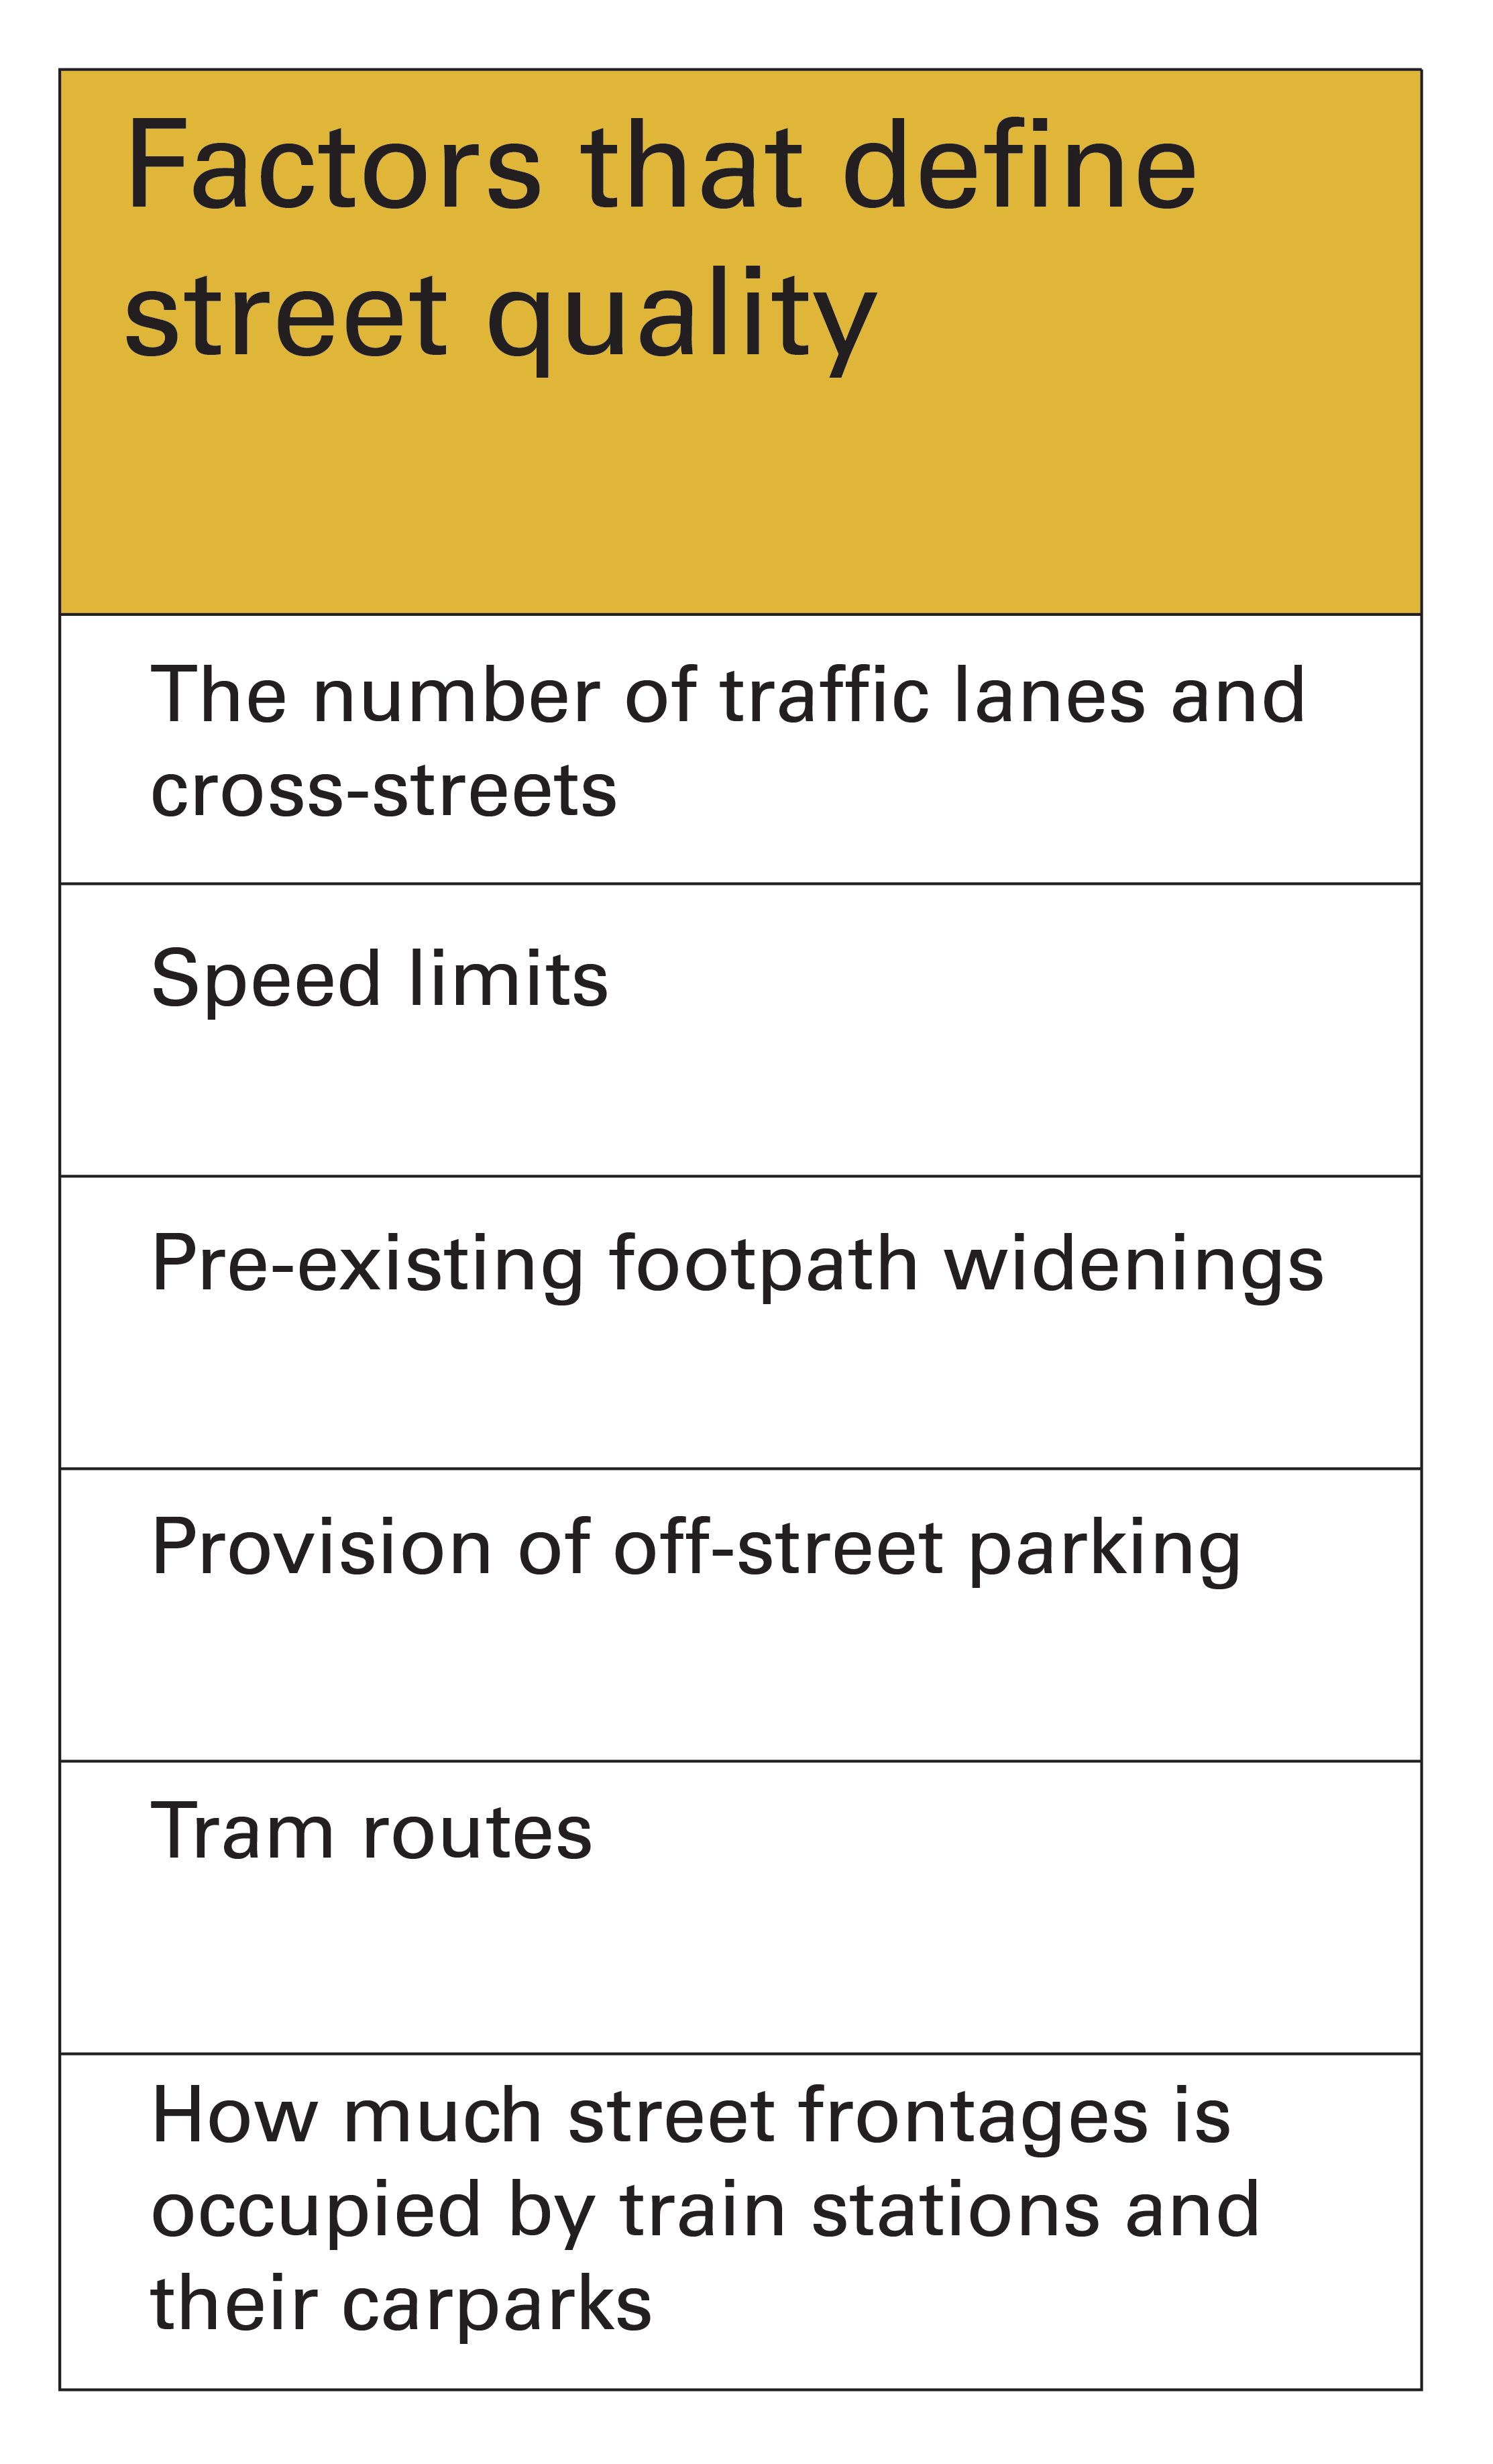 A table with a yellow heading listing the factors that define street quality